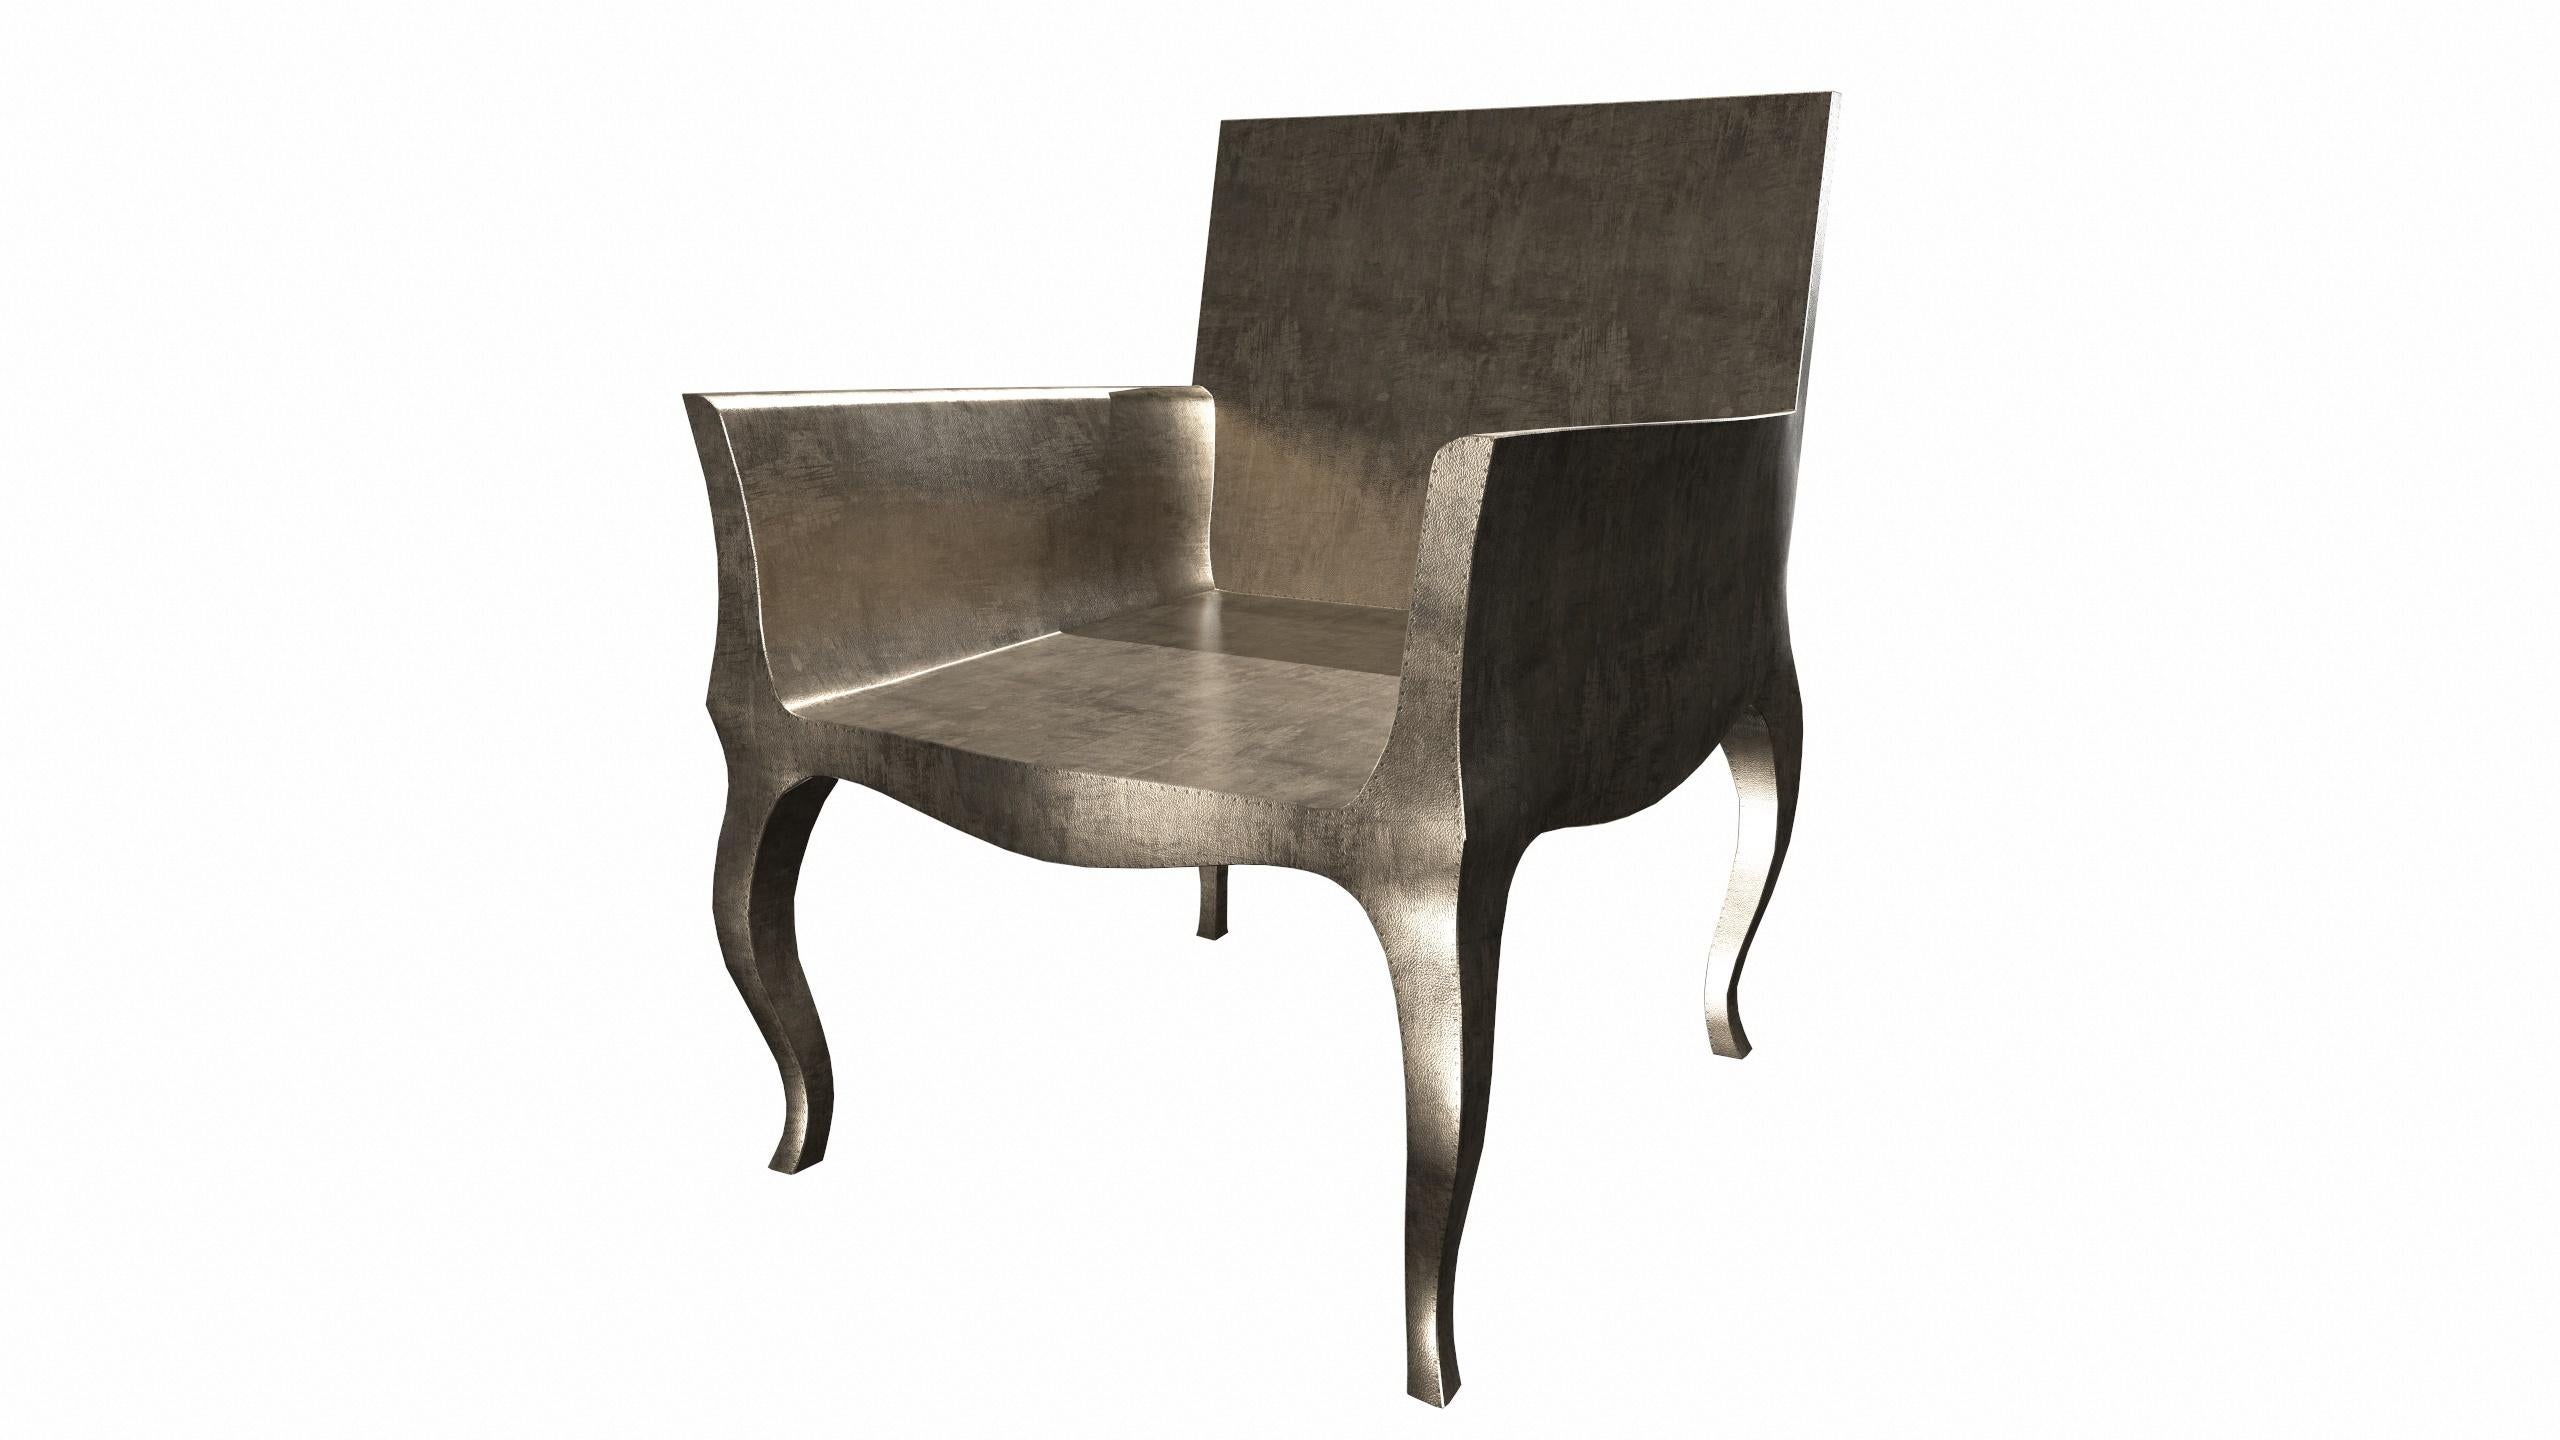 Hand-Carved Art Nouveau Chairs Fine Hammered in Antique White Bronze by Paul Mathieu For Sale